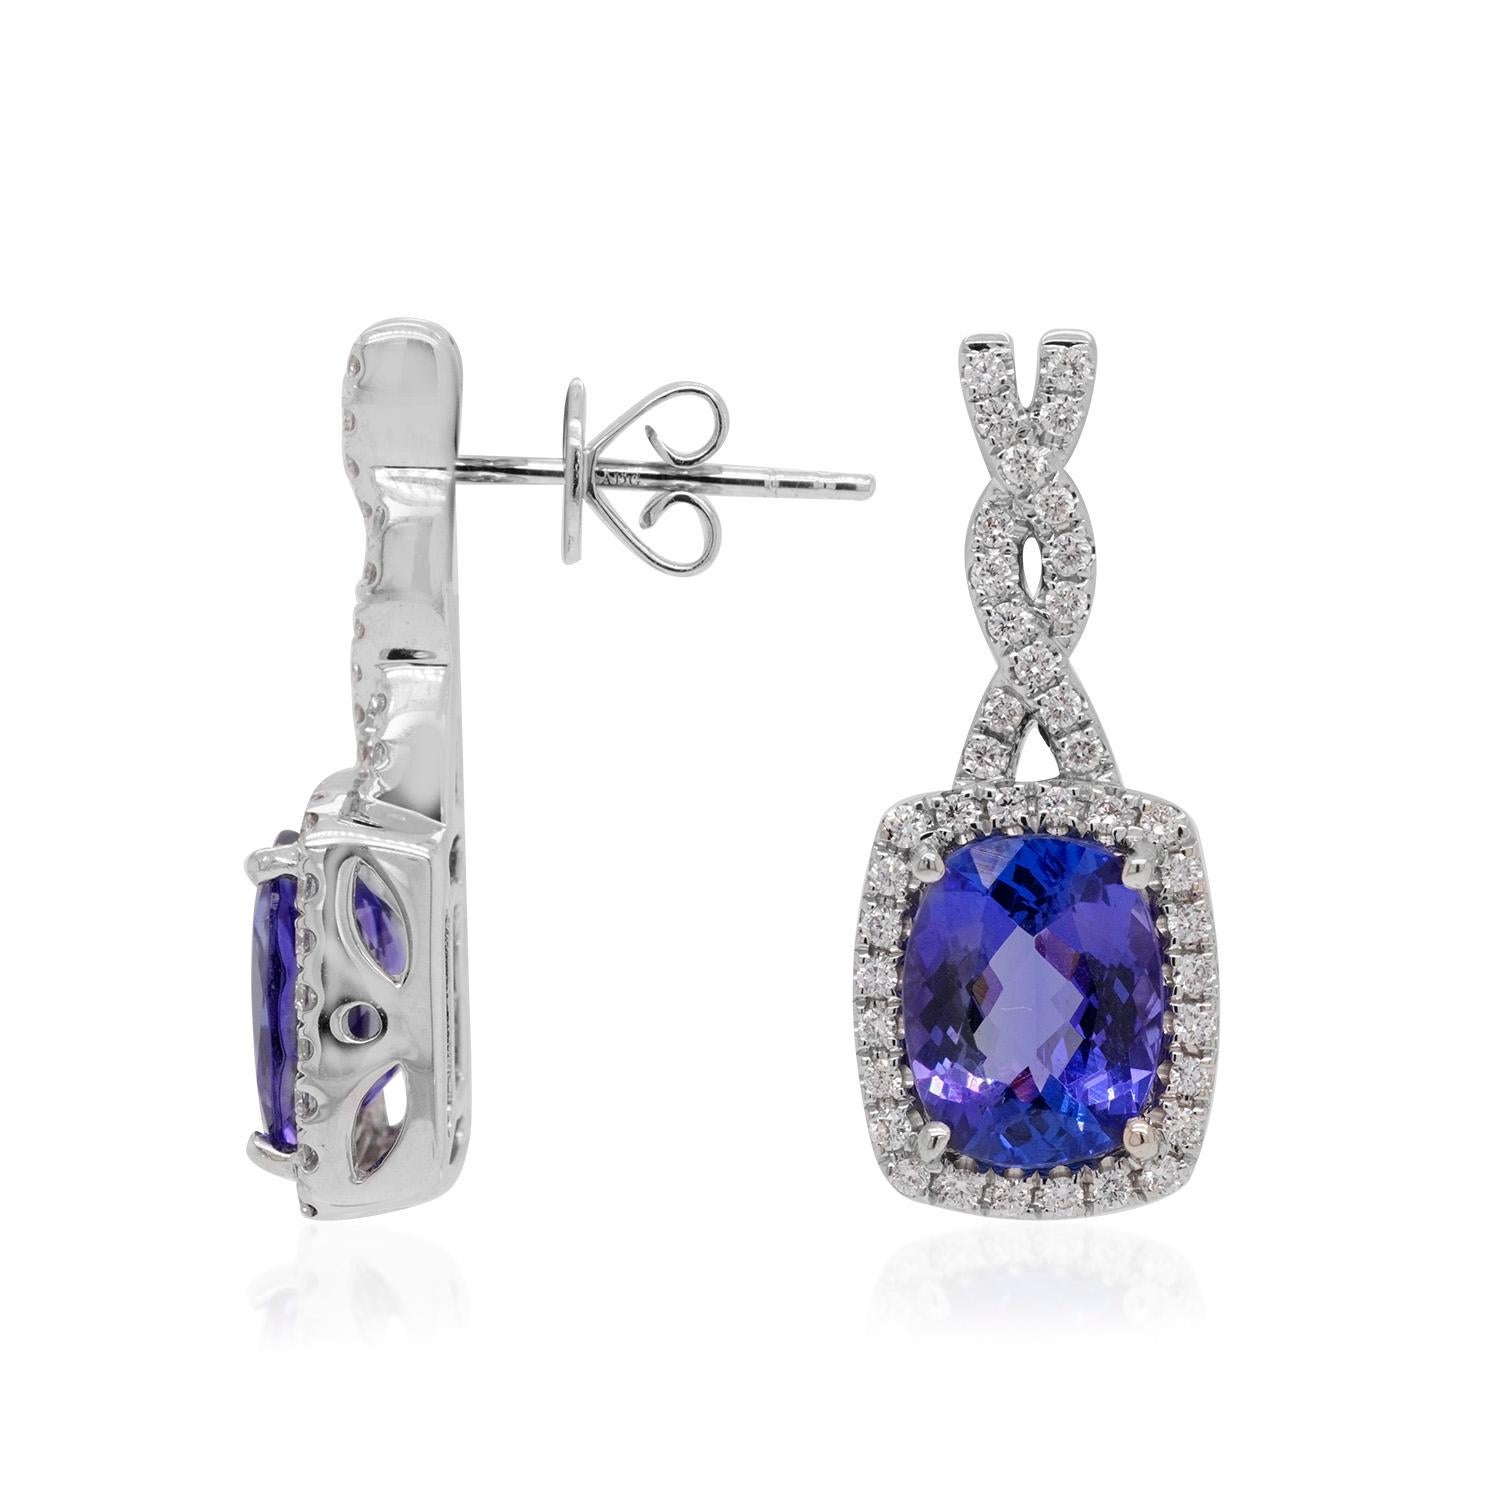 Crafted in 18K white gold, the impressive shine of these incredible earrings displays their fine craftsmanship with flair. Embellished with a cushion cut Tanzanite, highlights its deep color which adds a touch of drama to your apparel. Adorned with